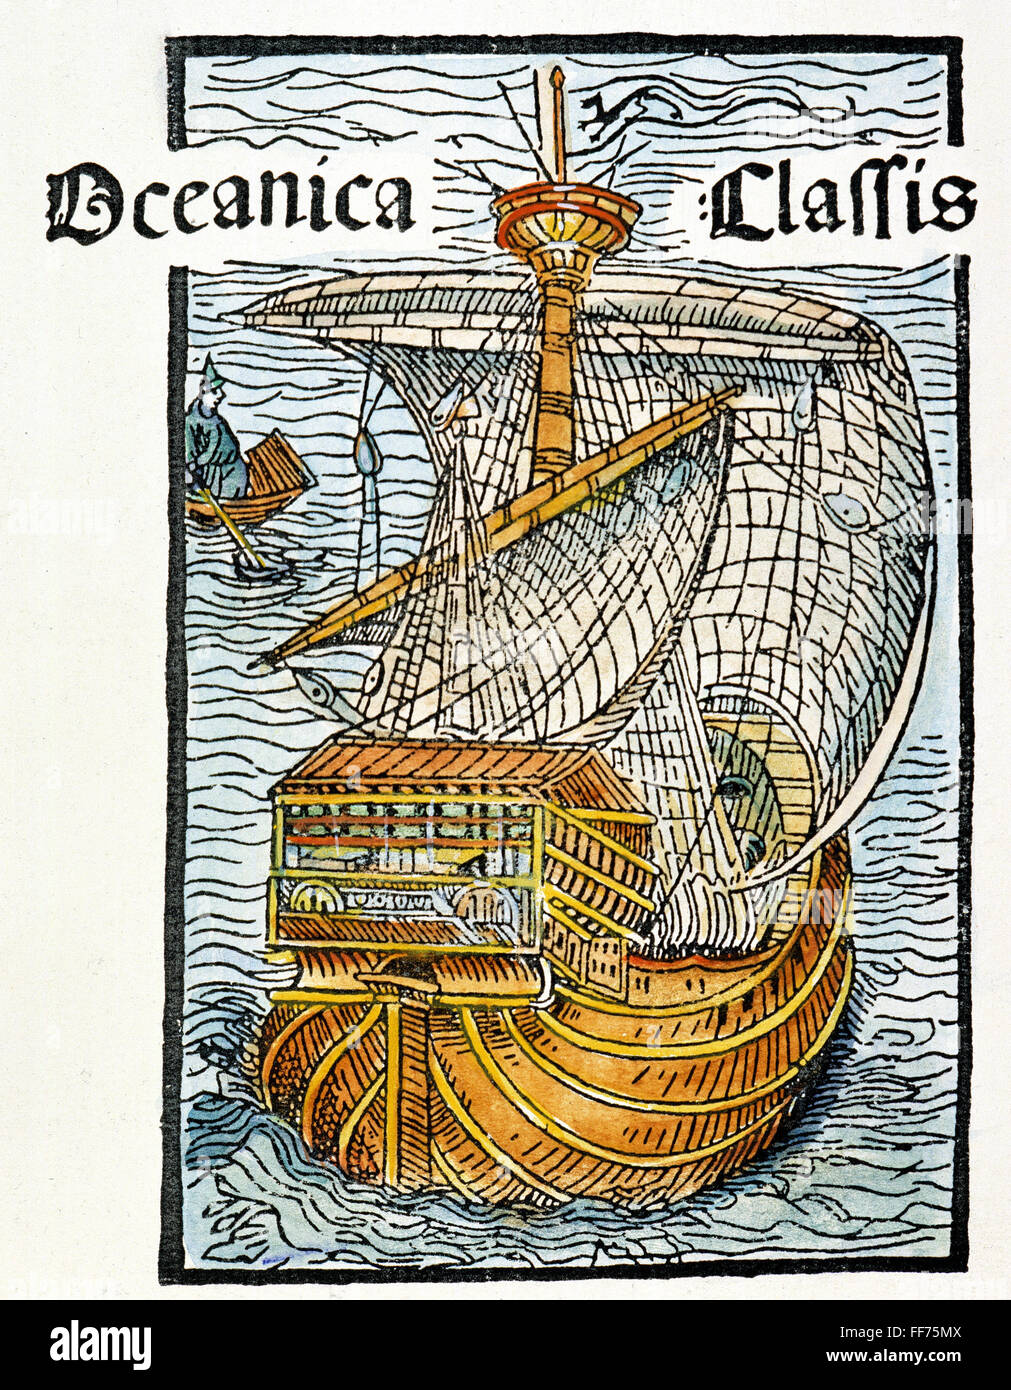 CARAVEL /nsimilar to the 'Santa Maria. Woodcut from the illustrated edition of the Columbus letter to Gabriel Sanchez, 1493. Stock Photo